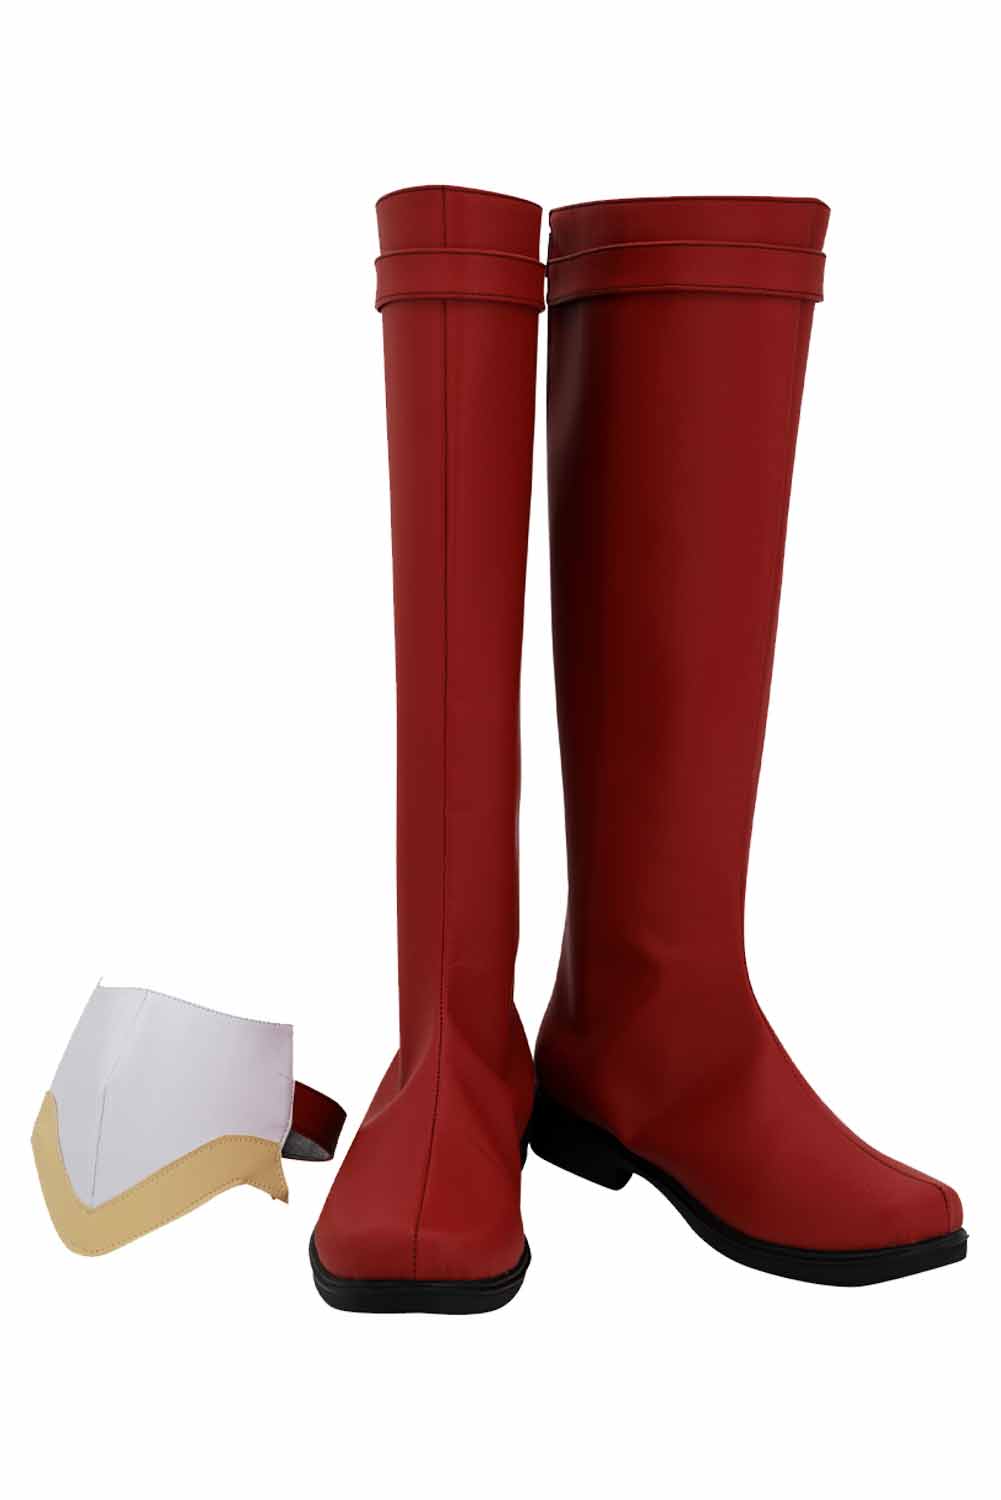 Anime Is It Wrong to Try to Pick Up Girls in a Dungeon?: Arrow of the Orion Bell Cranel Cosplay Shoes Costumes Accessory